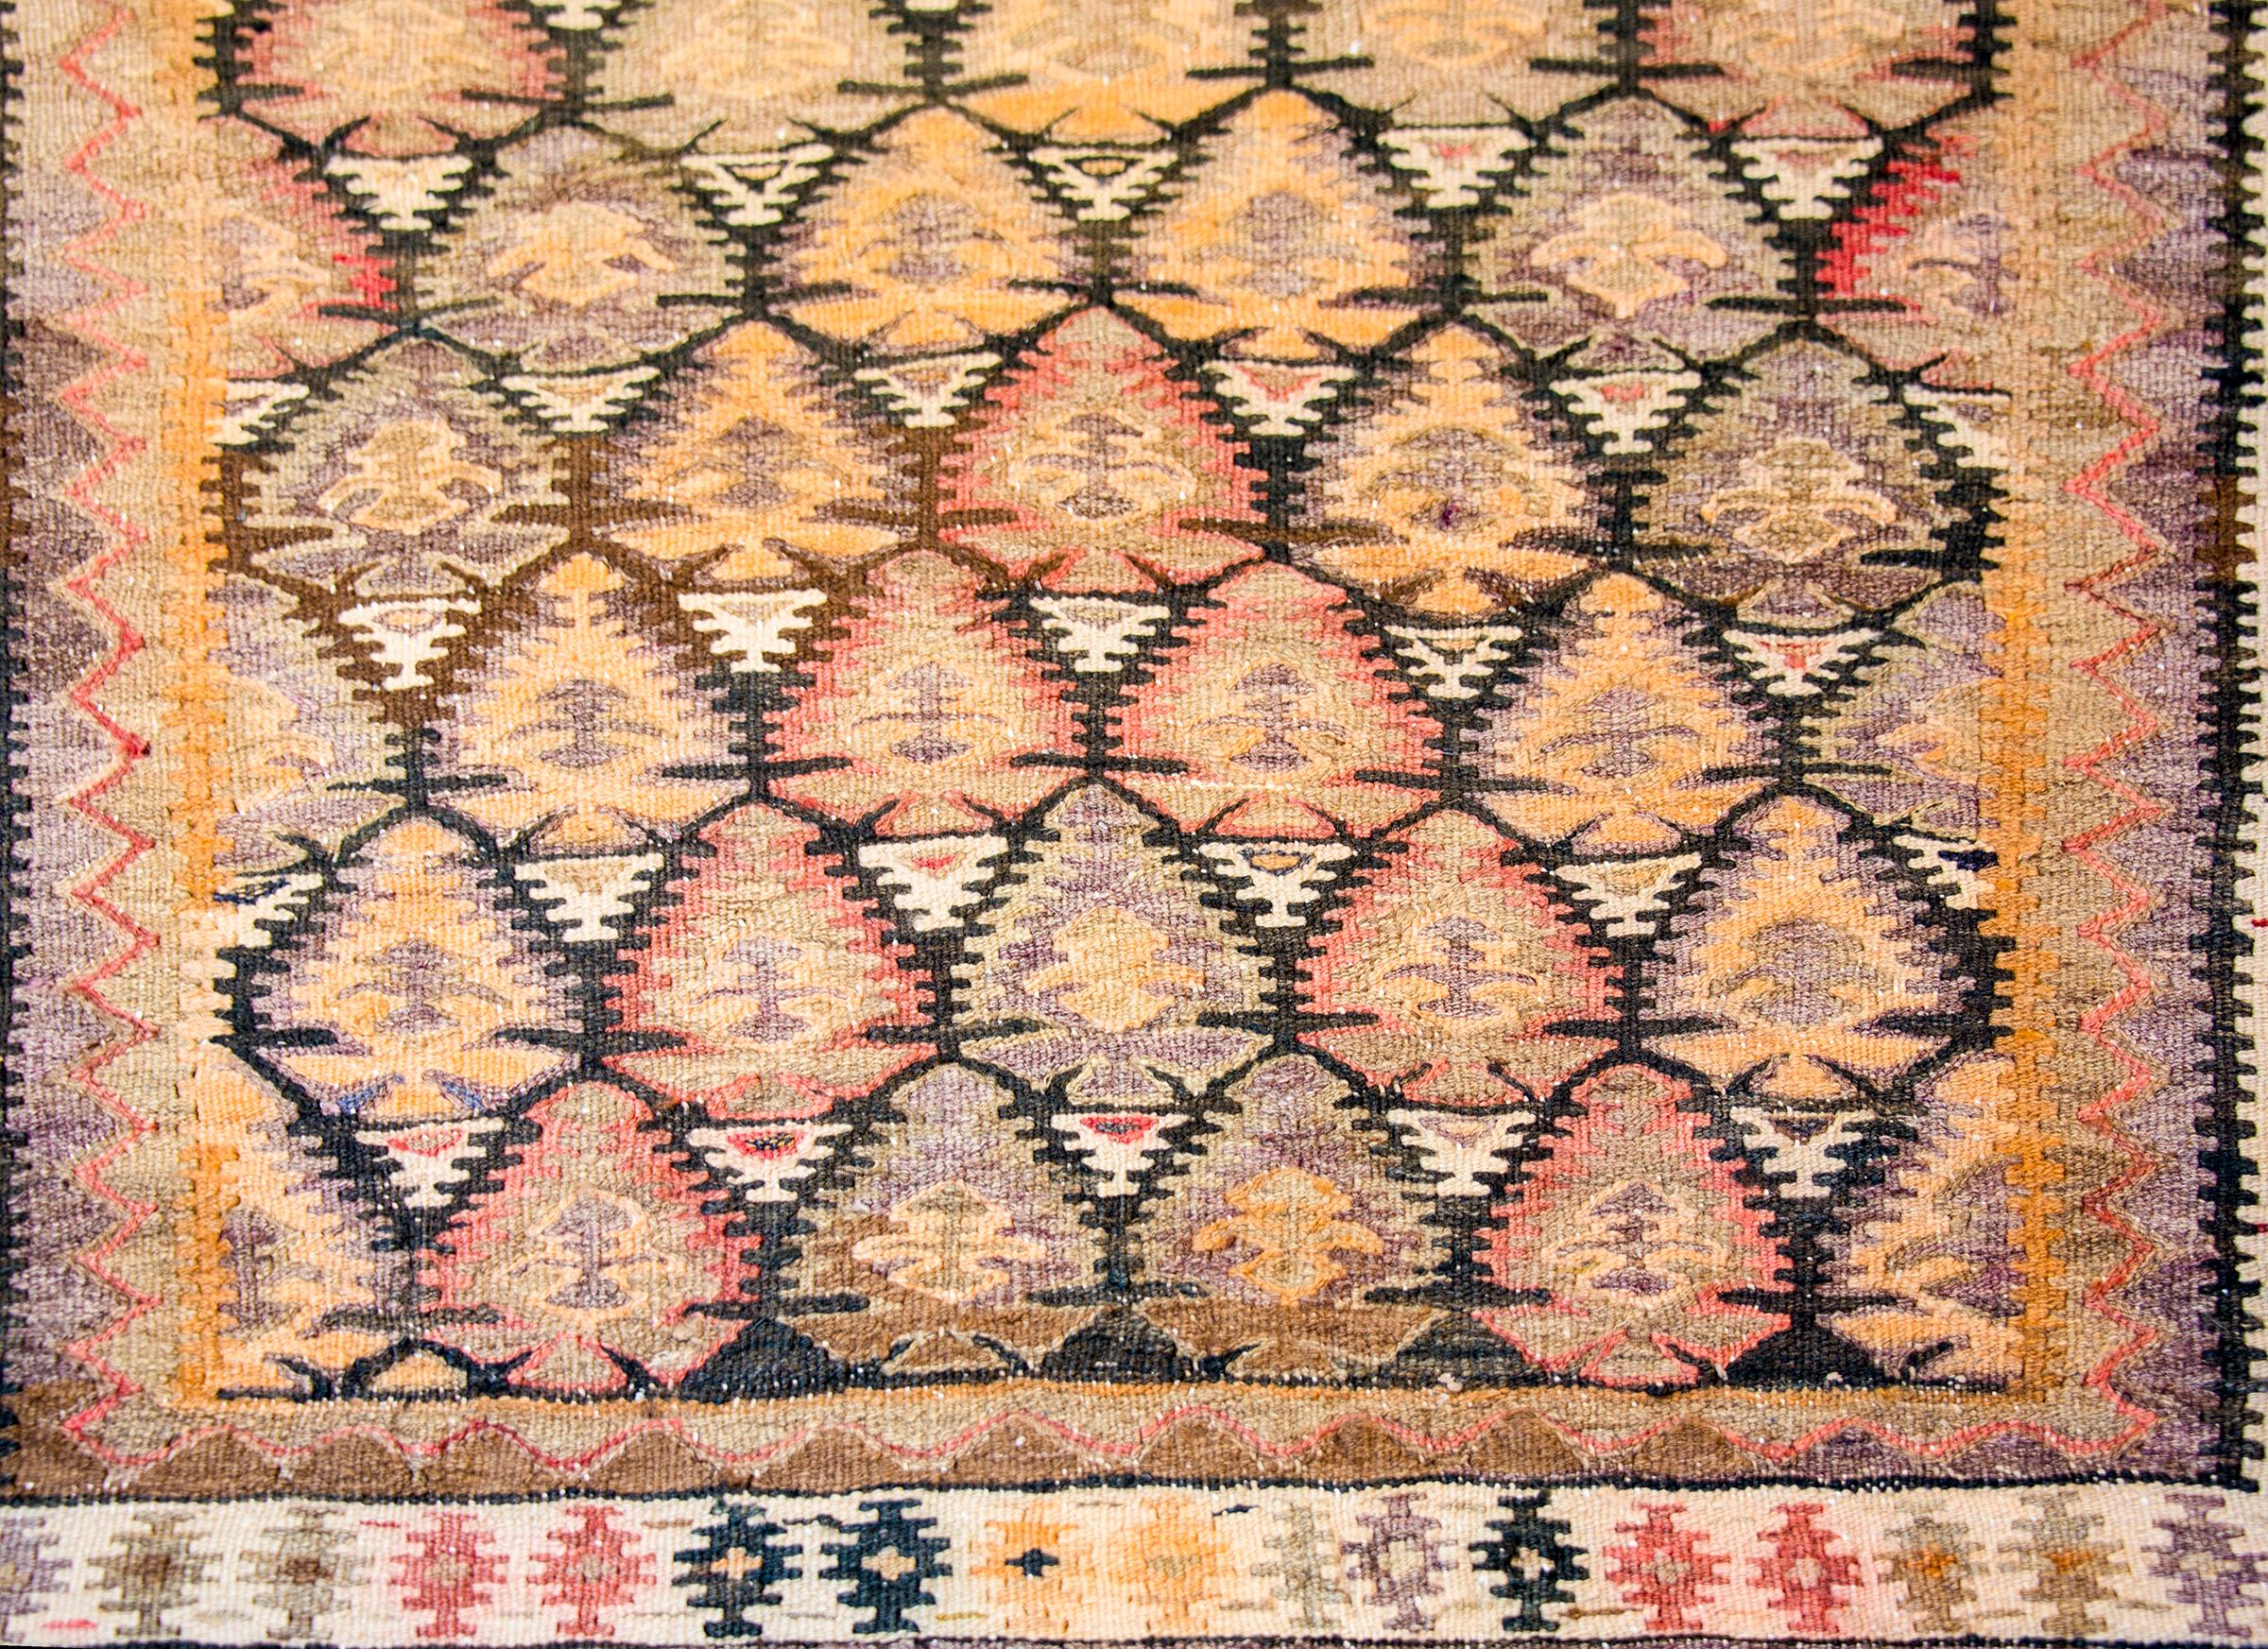 Beautiful Mid-20th Century Qazvin Kilim Rug In Good Condition For Sale In Chicago, IL